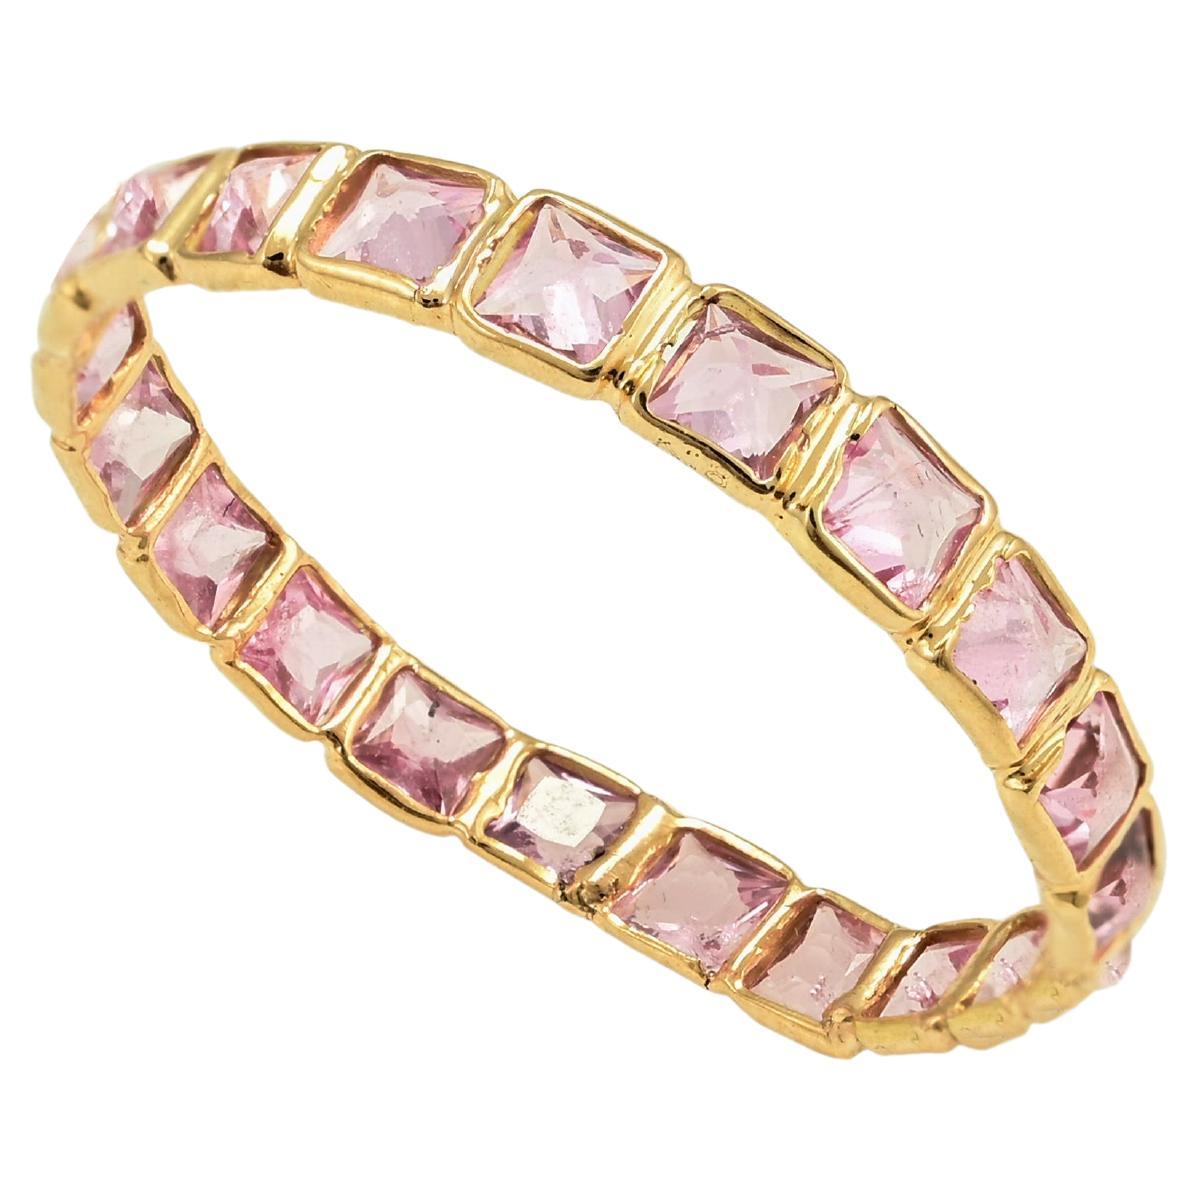 For Sale:  18 Karat Solid Yellow Gold Thin Pink Sapphire Eternity Band Ring, Everyday Ring